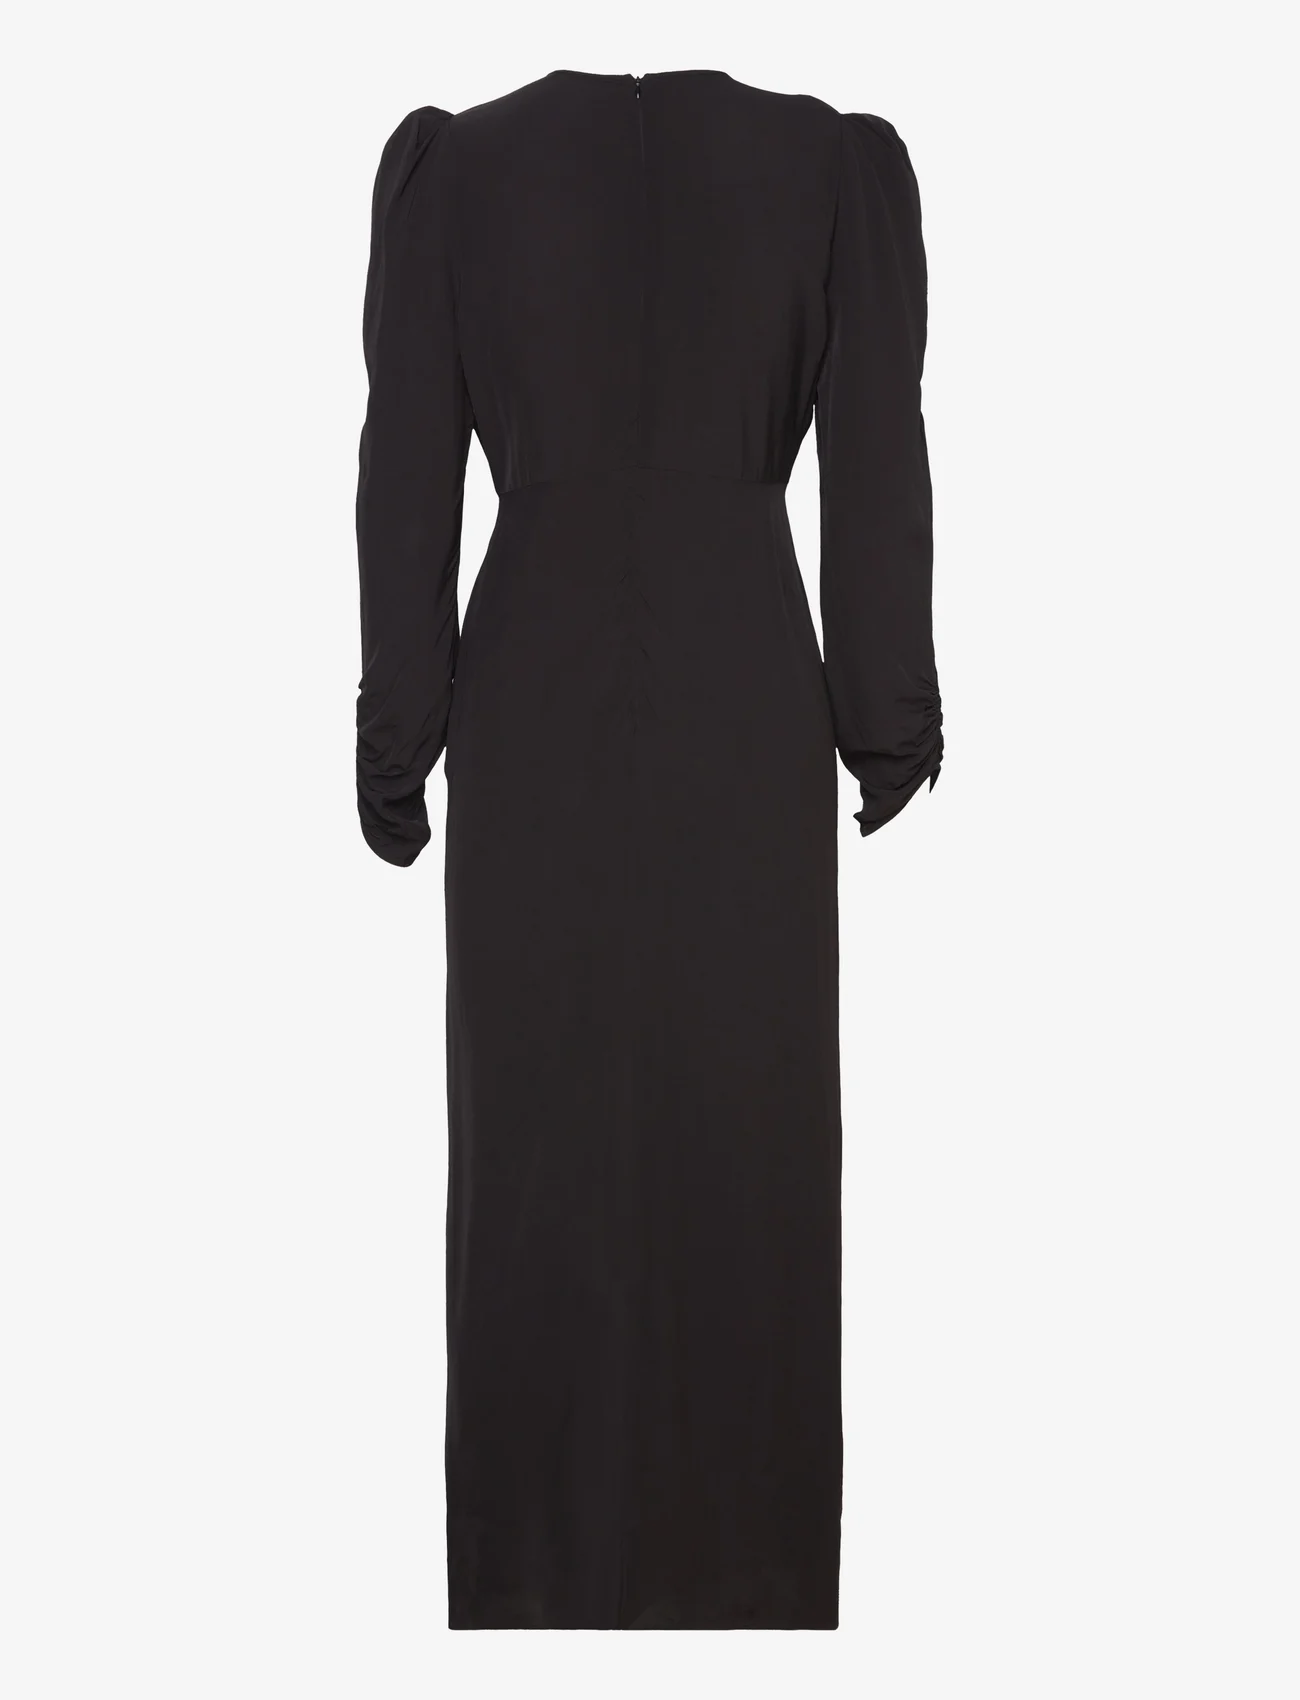 Second Female - Parisa Maxi Dress - party wear at outlet prices - black - 1